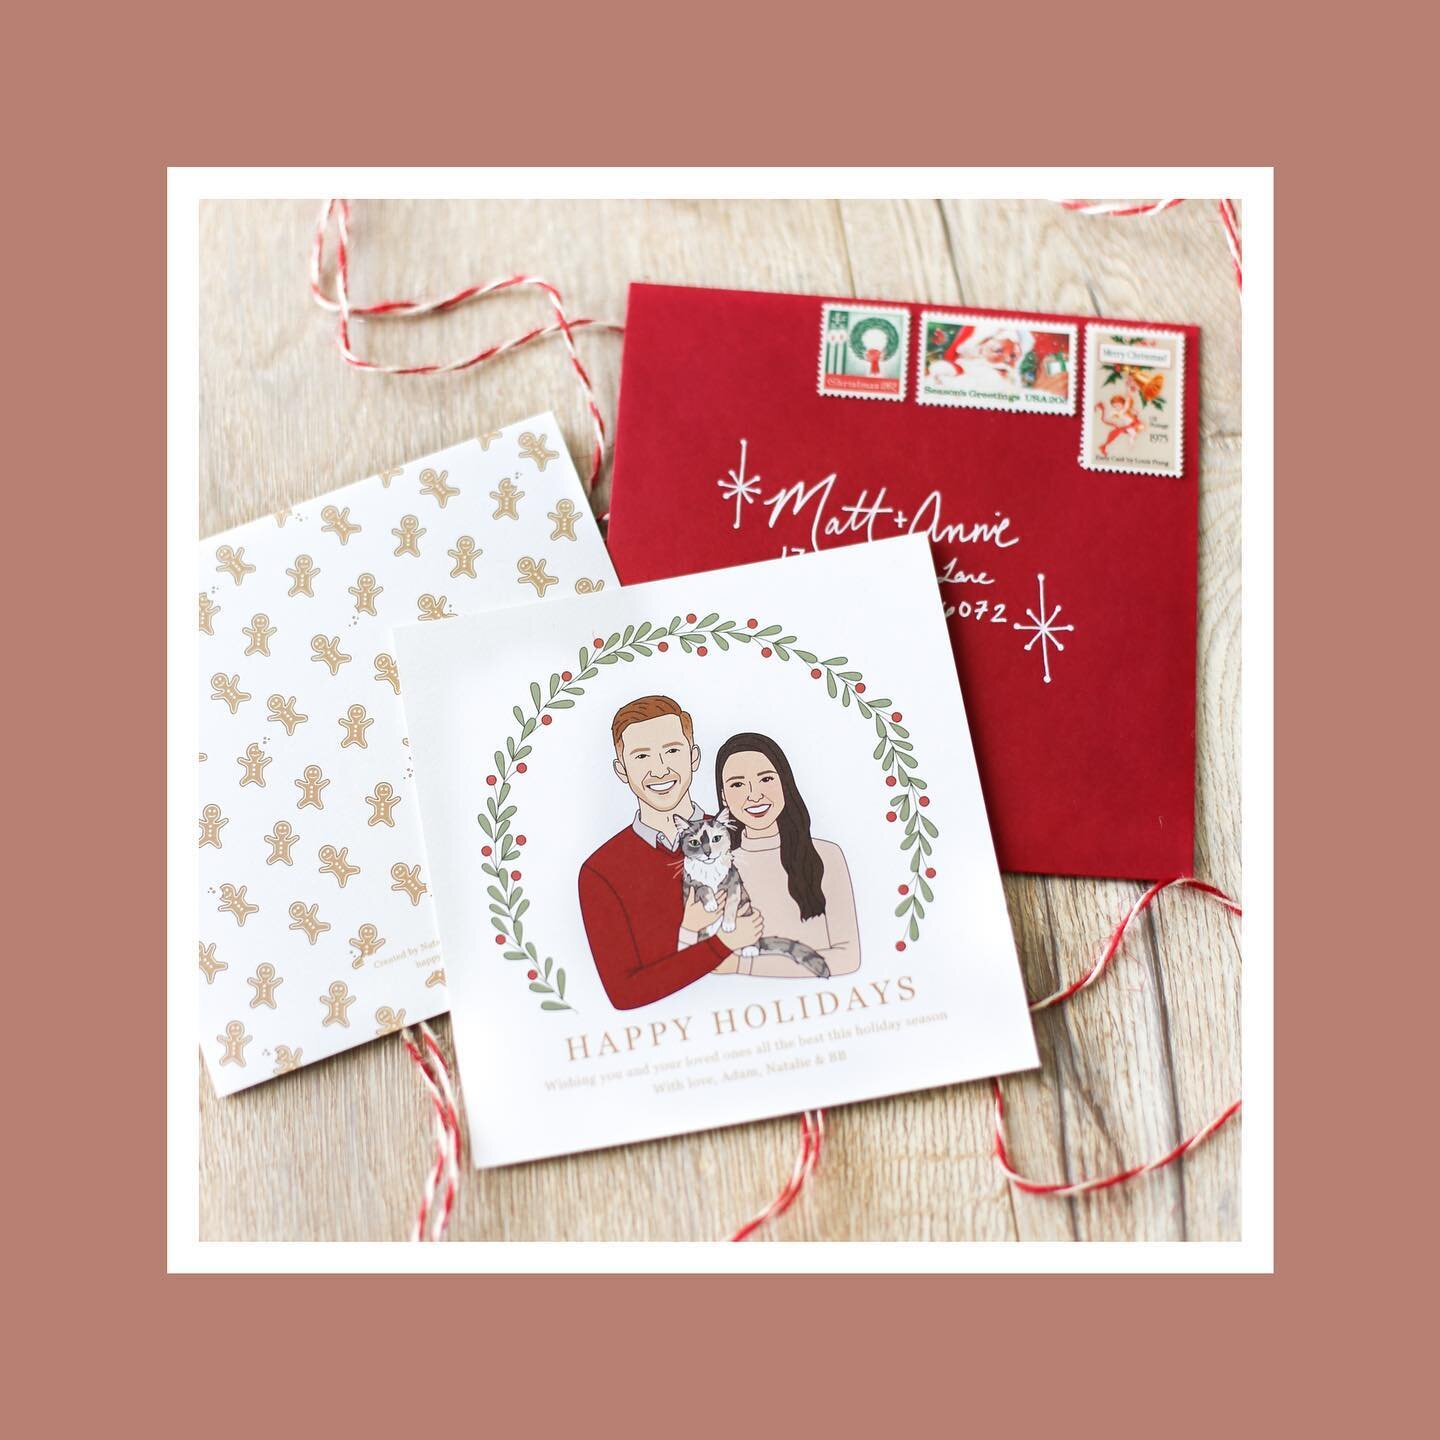 Well... any of the holiday cards we sent out that haven&rsquo;t arrived by now are probably lost in a USPS warehouse somewhere... so I figured it&rsquo;s time to finally share the design I created for my own family&rsquo;s holiday cards 🎄💃
The fron